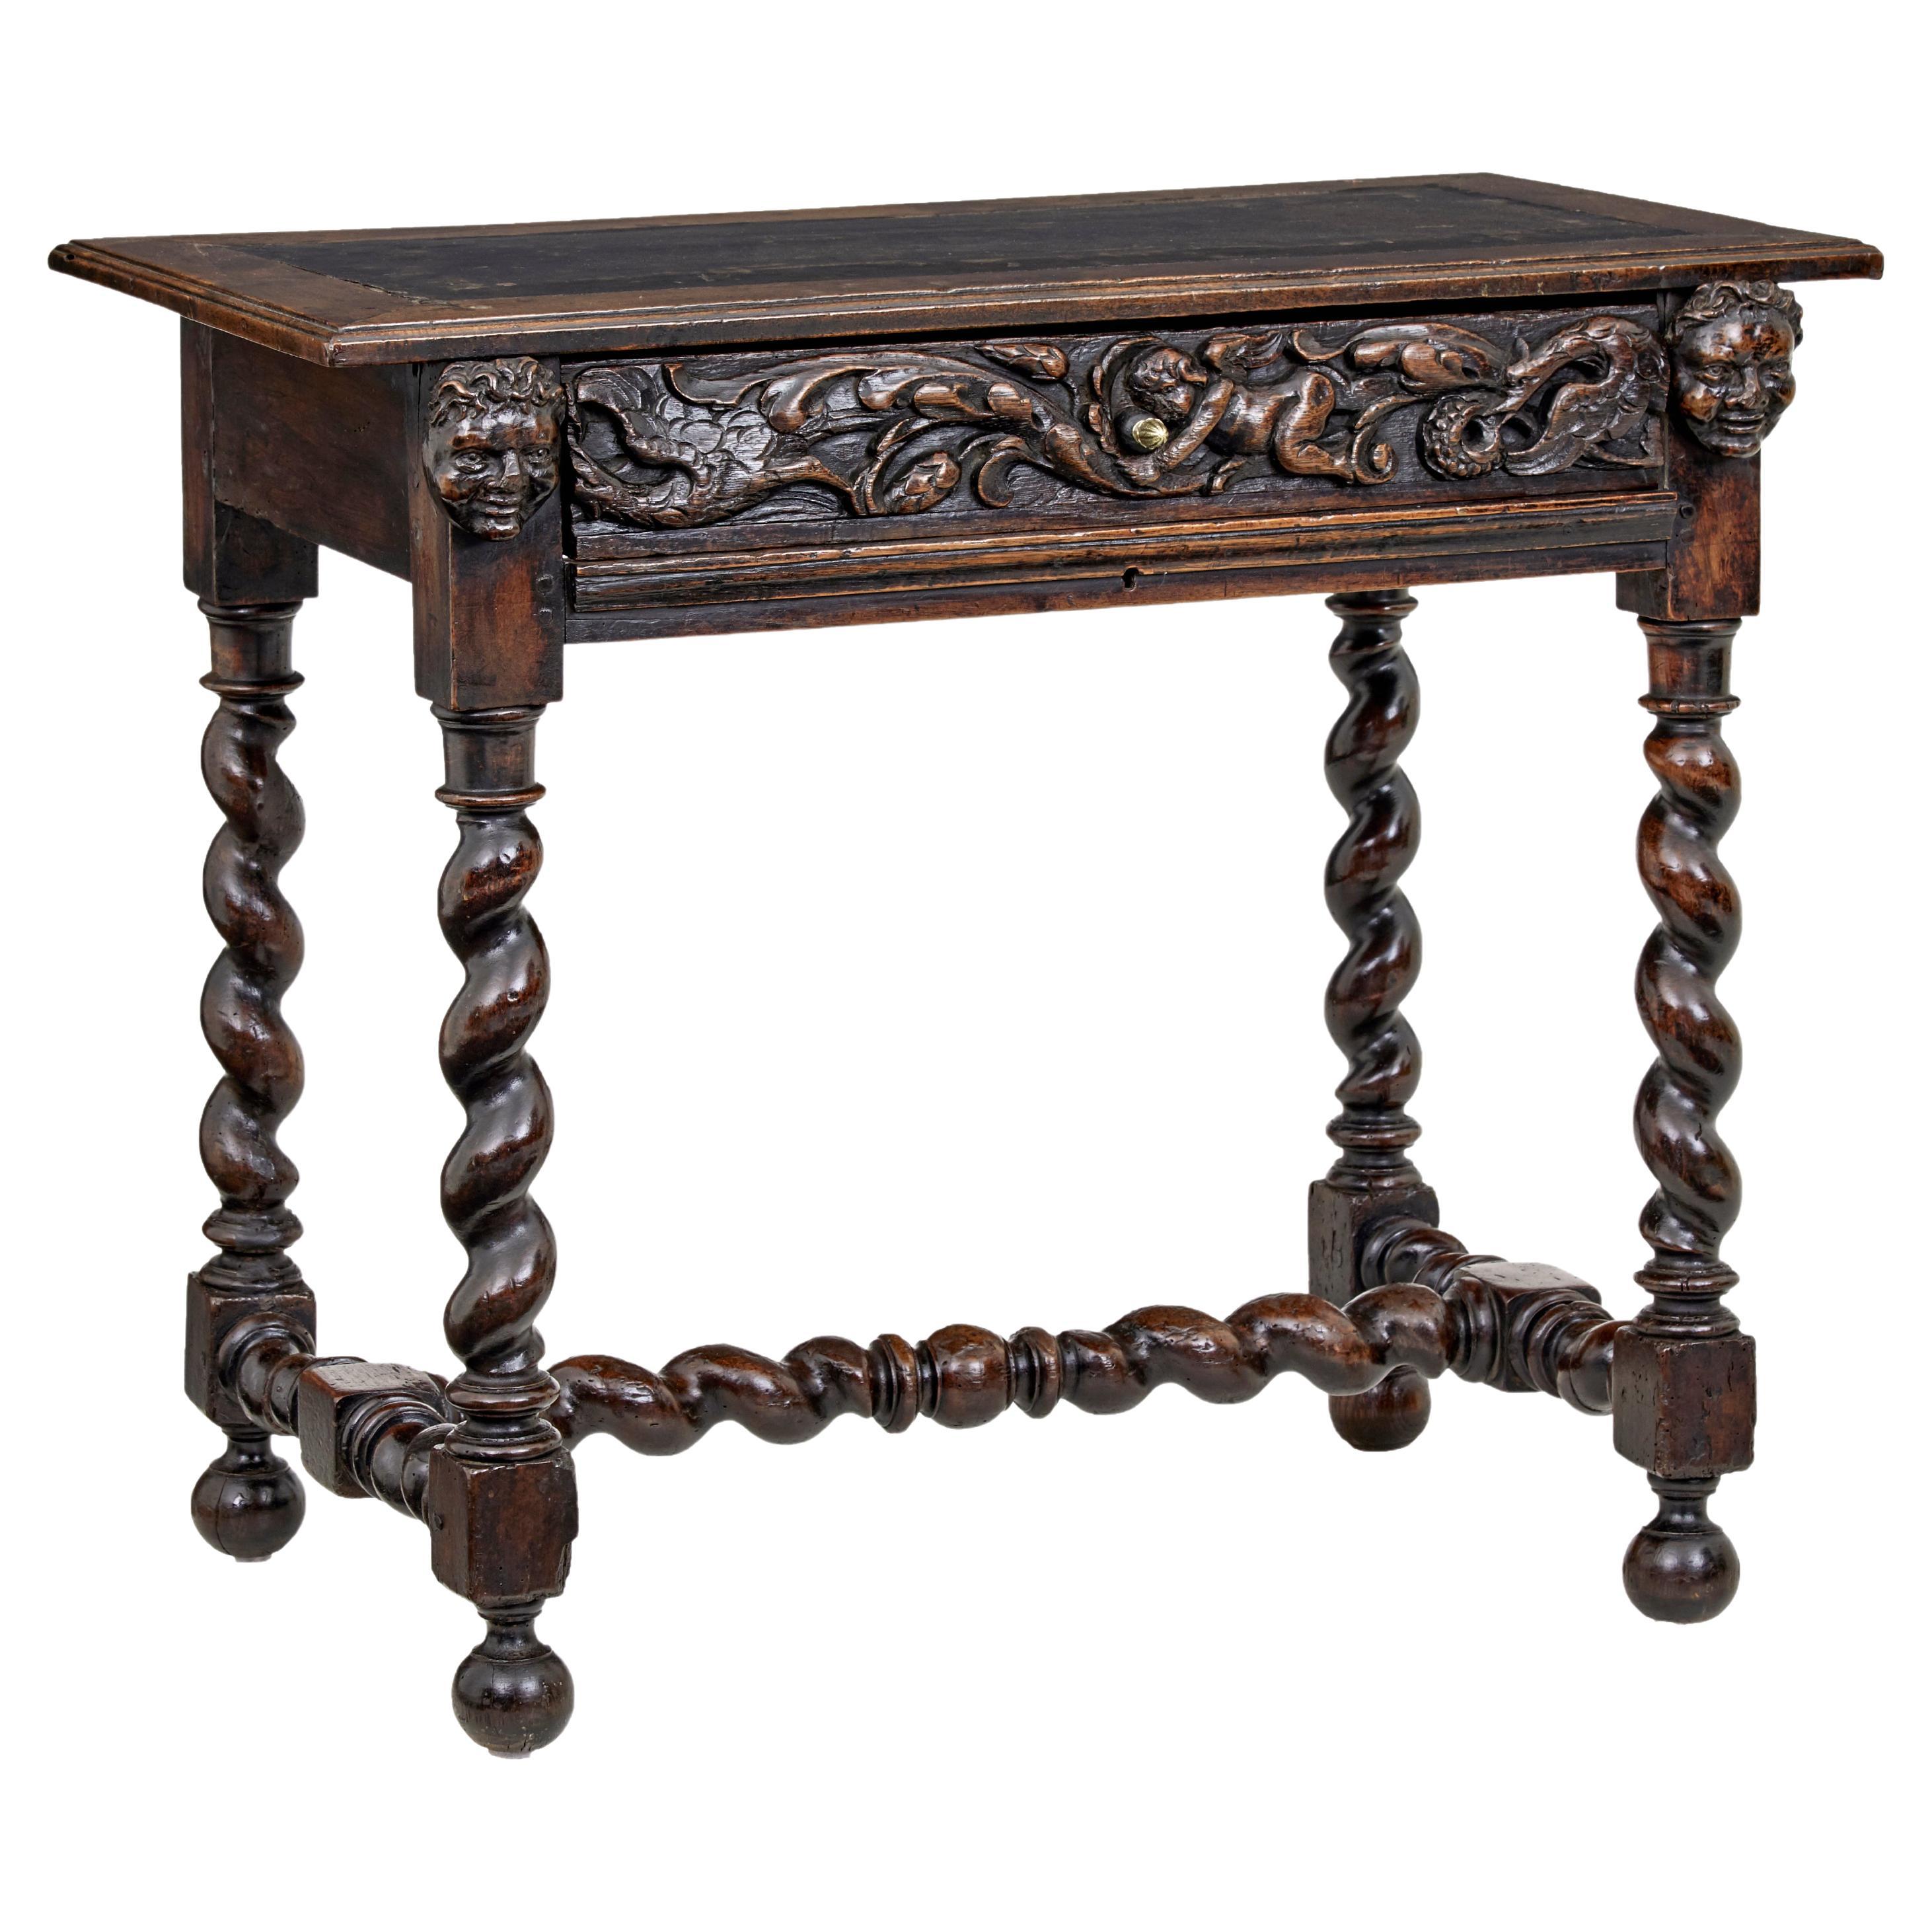 Early 19th century Flemish carved walnut side table